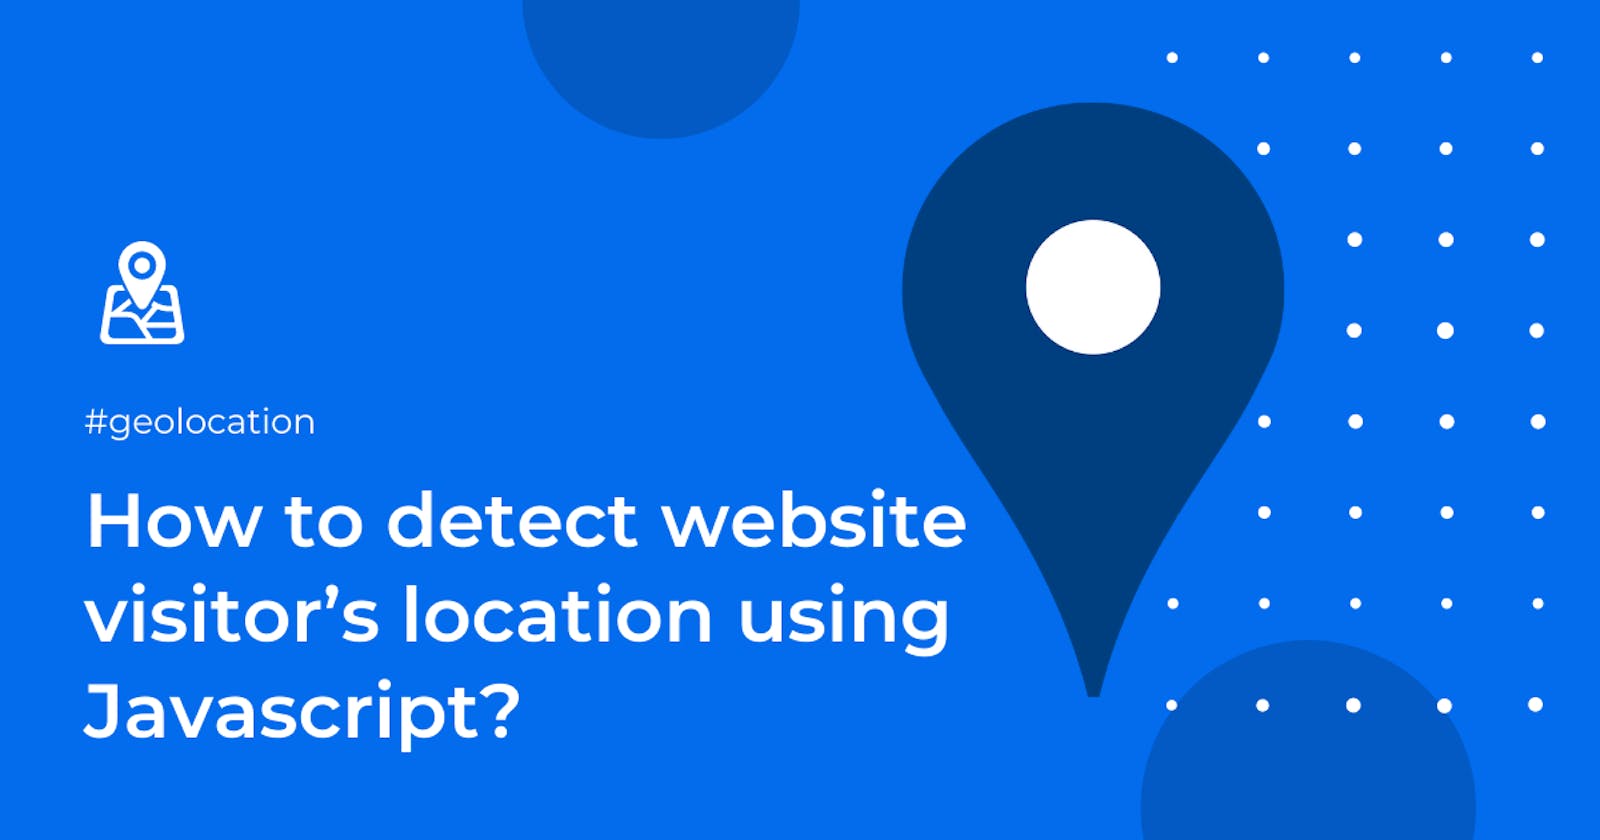 How to detect website visitor’s location using Javascript?